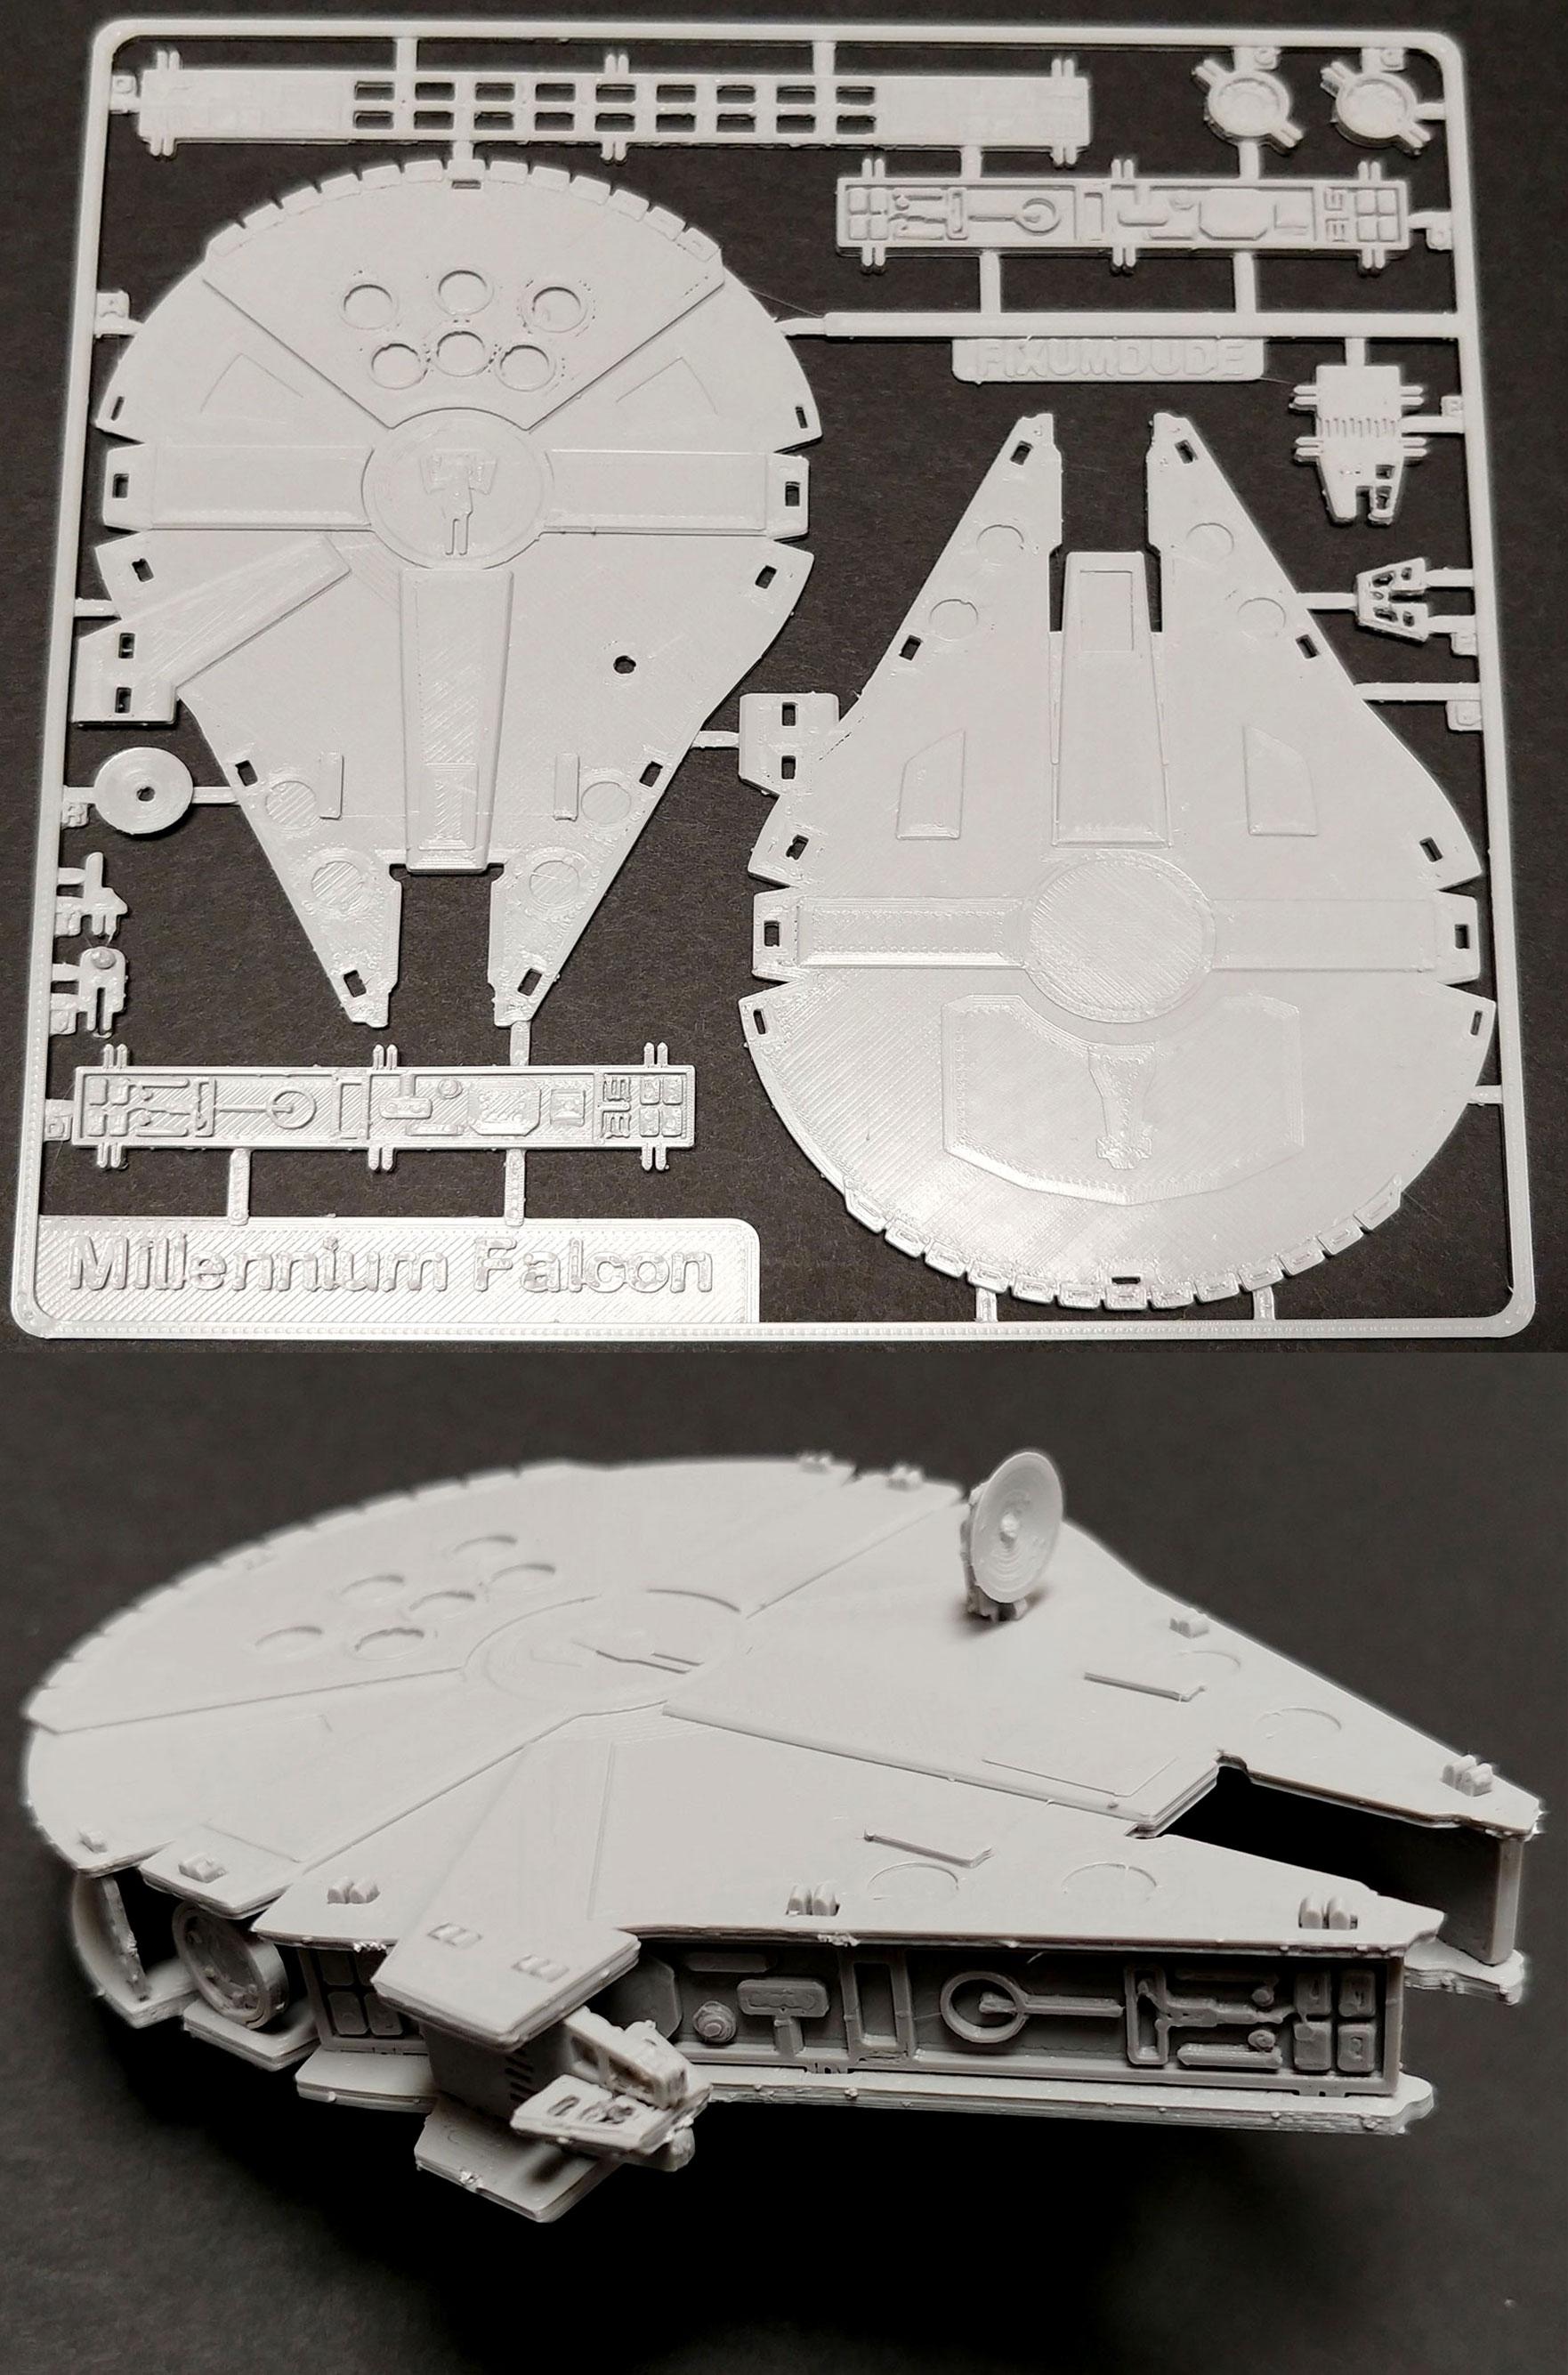 Millennium Falcon Kit Card by Fixumdude - Overview - 3d model